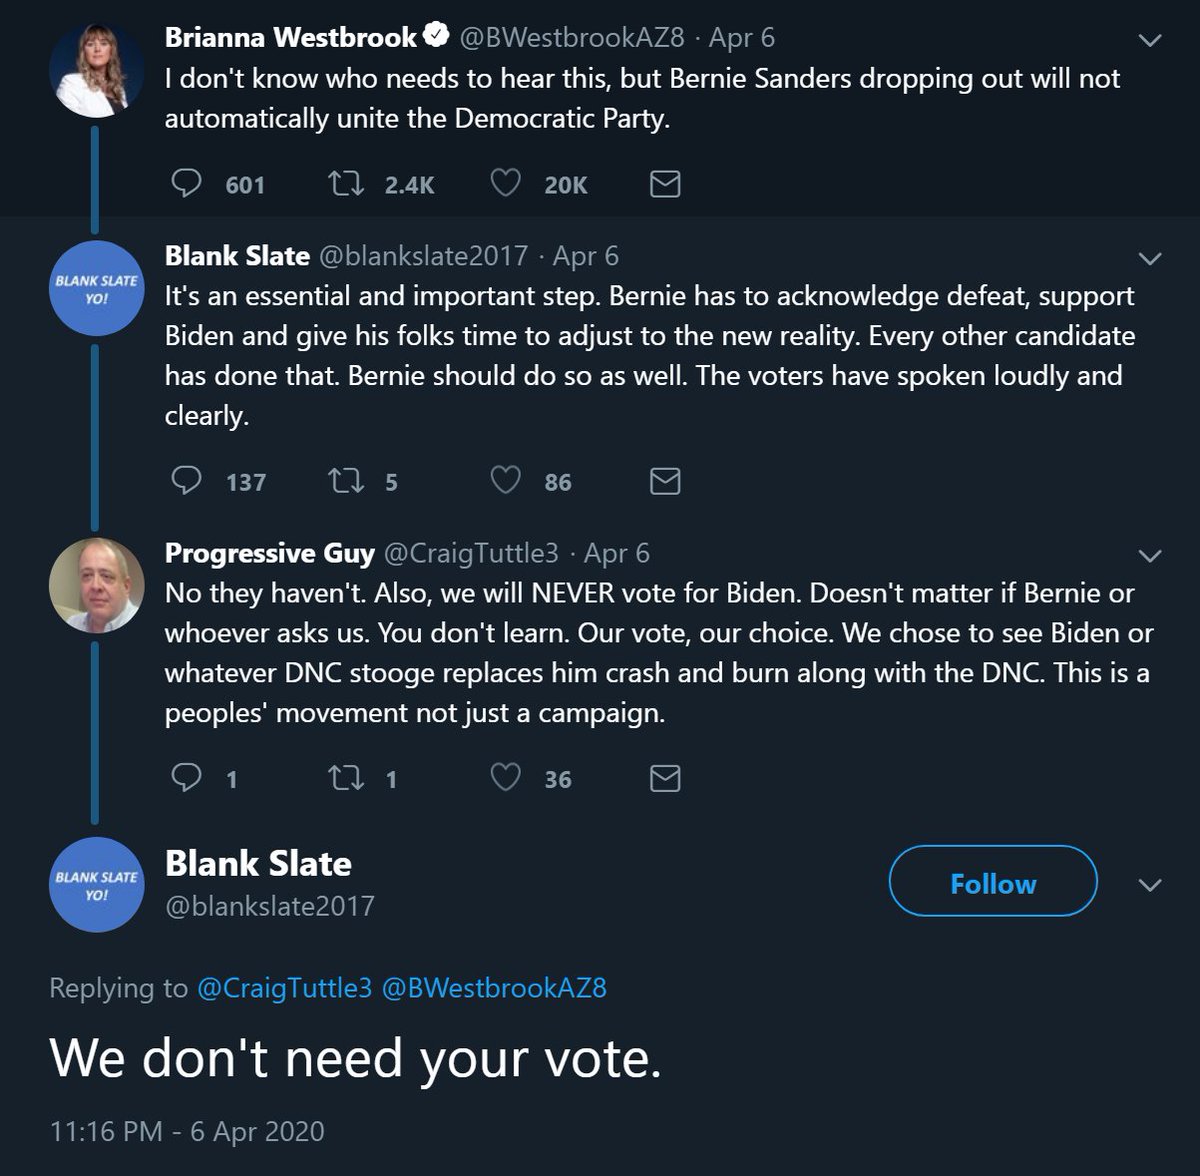 I feel like there is a mixed message here. It is 'essential and important' to unite but "we don't need your vote". So confusing. I'll just go with option 2. It's the easiest.